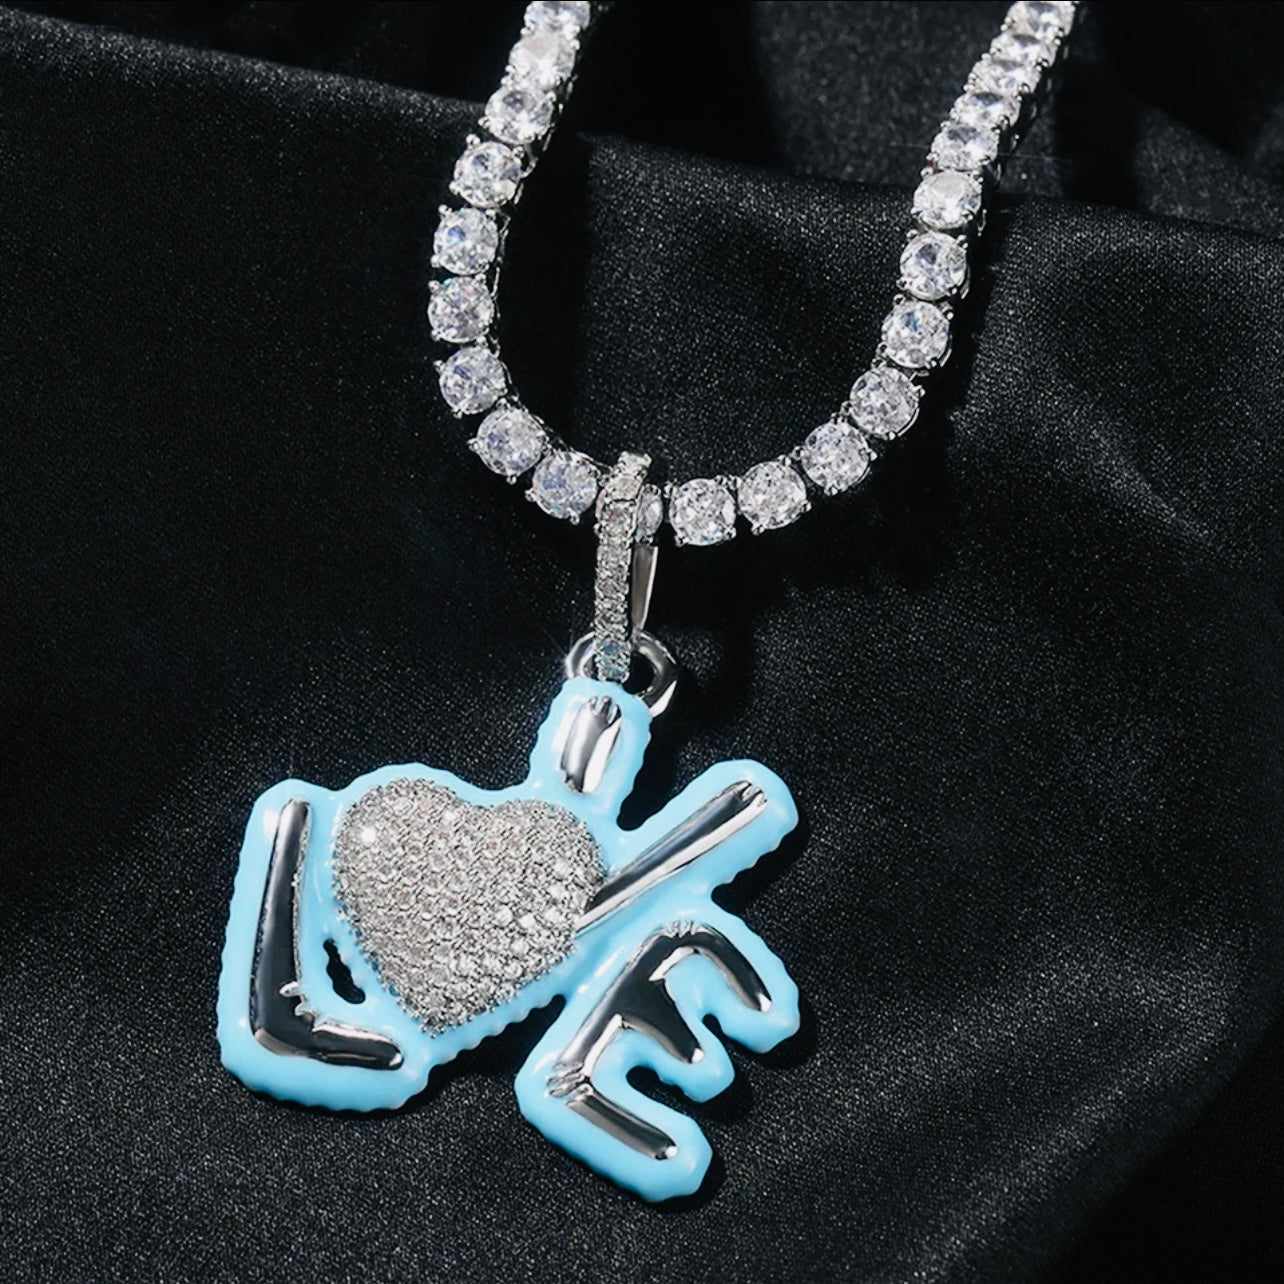 love pendant in the color pink, blue, silver or silver chrome with a matching diamond chain or silver or gold rope chain available only at Facetreasures.com